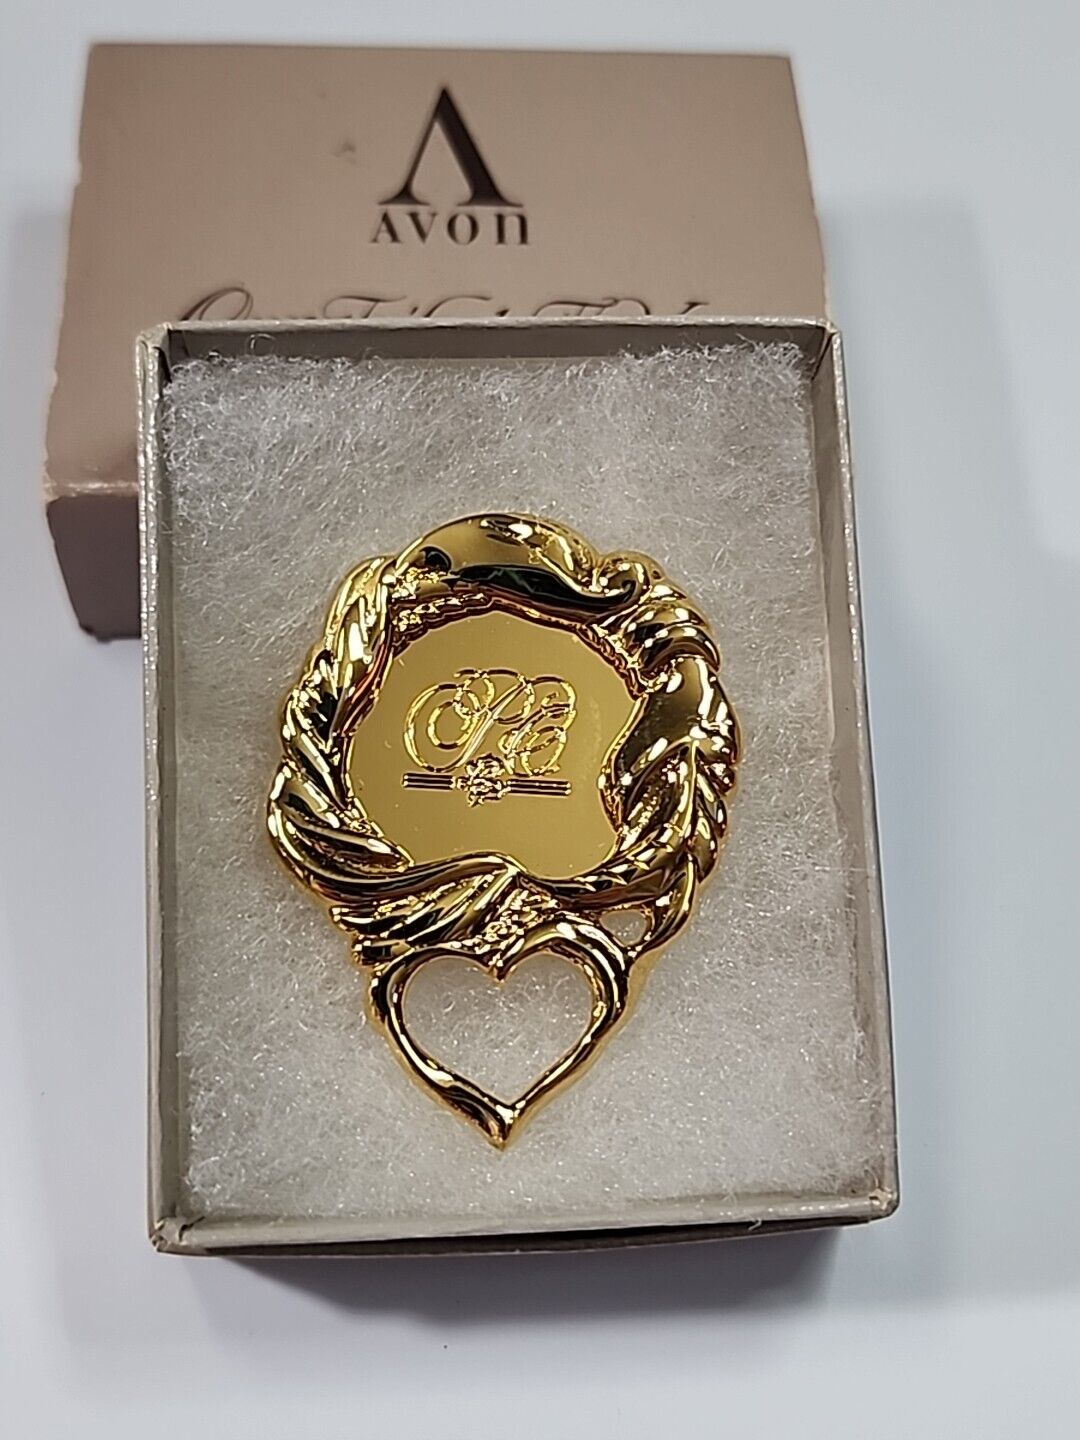 AVON 1991 President's Club Recognition Award Tribute Pin Gold Color Heart